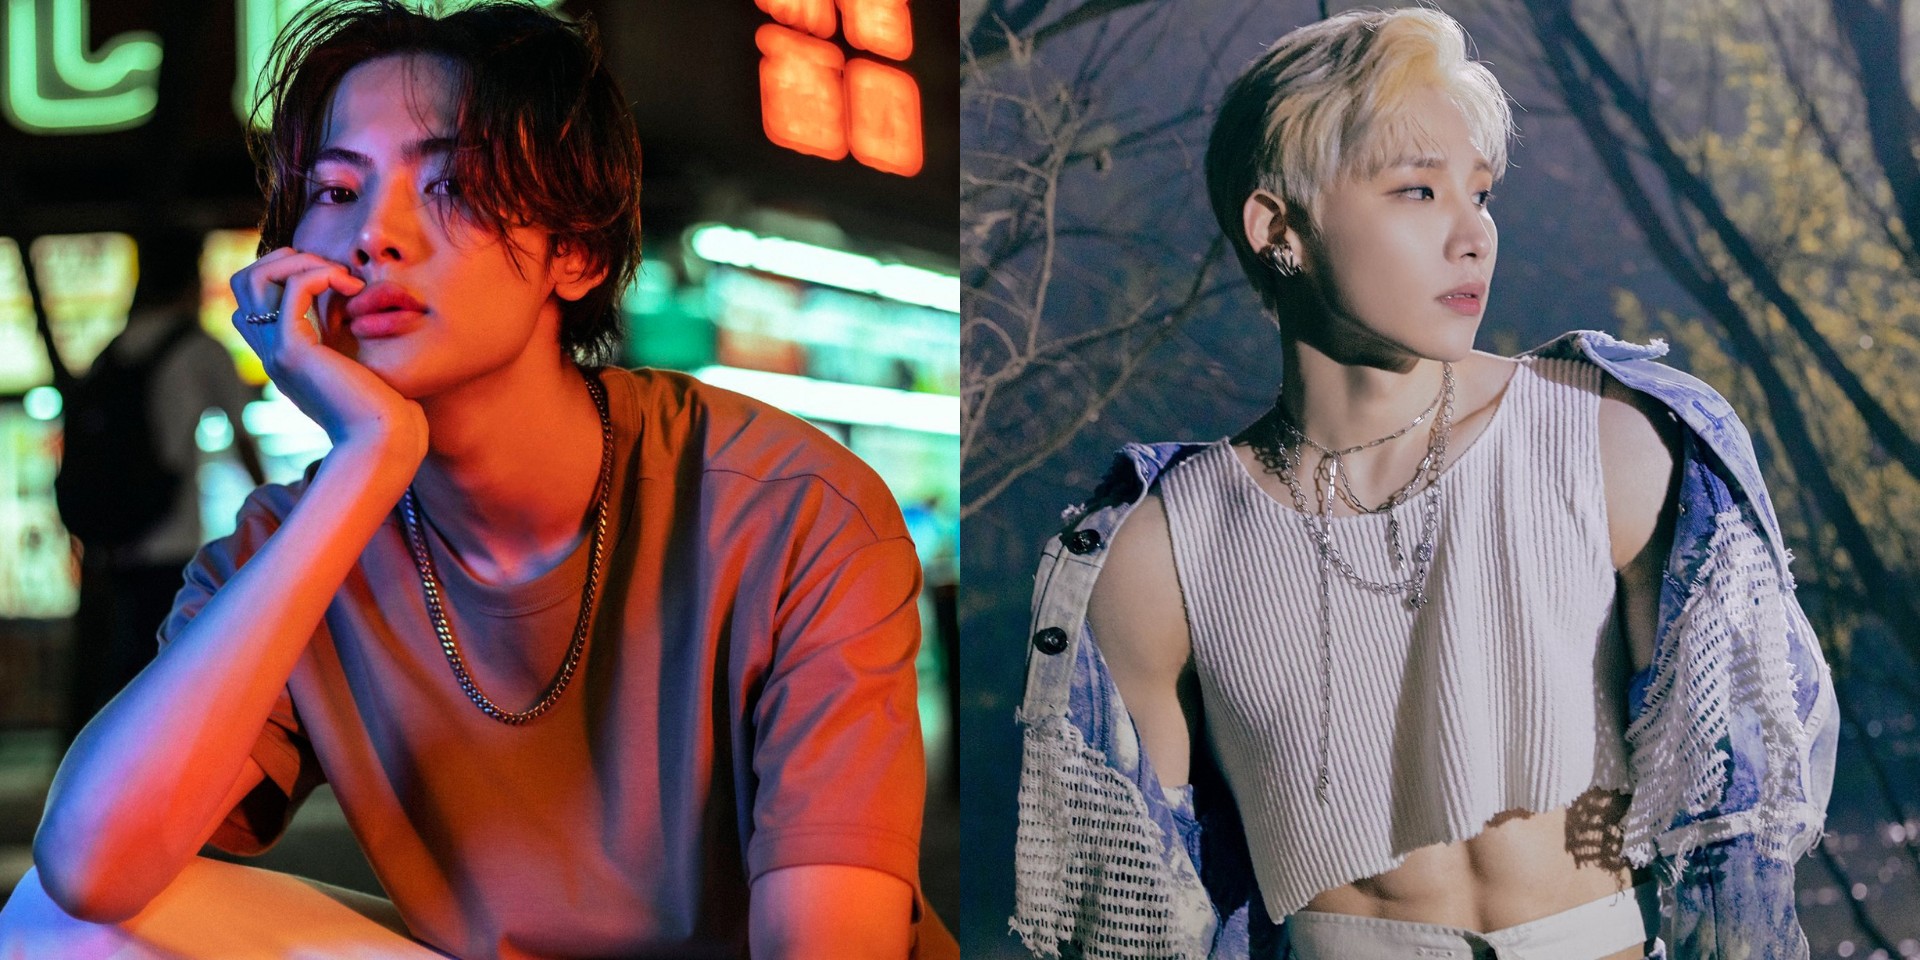 NOA drops new single 'LET GO' with AB6IX's Jeon Woong – watch